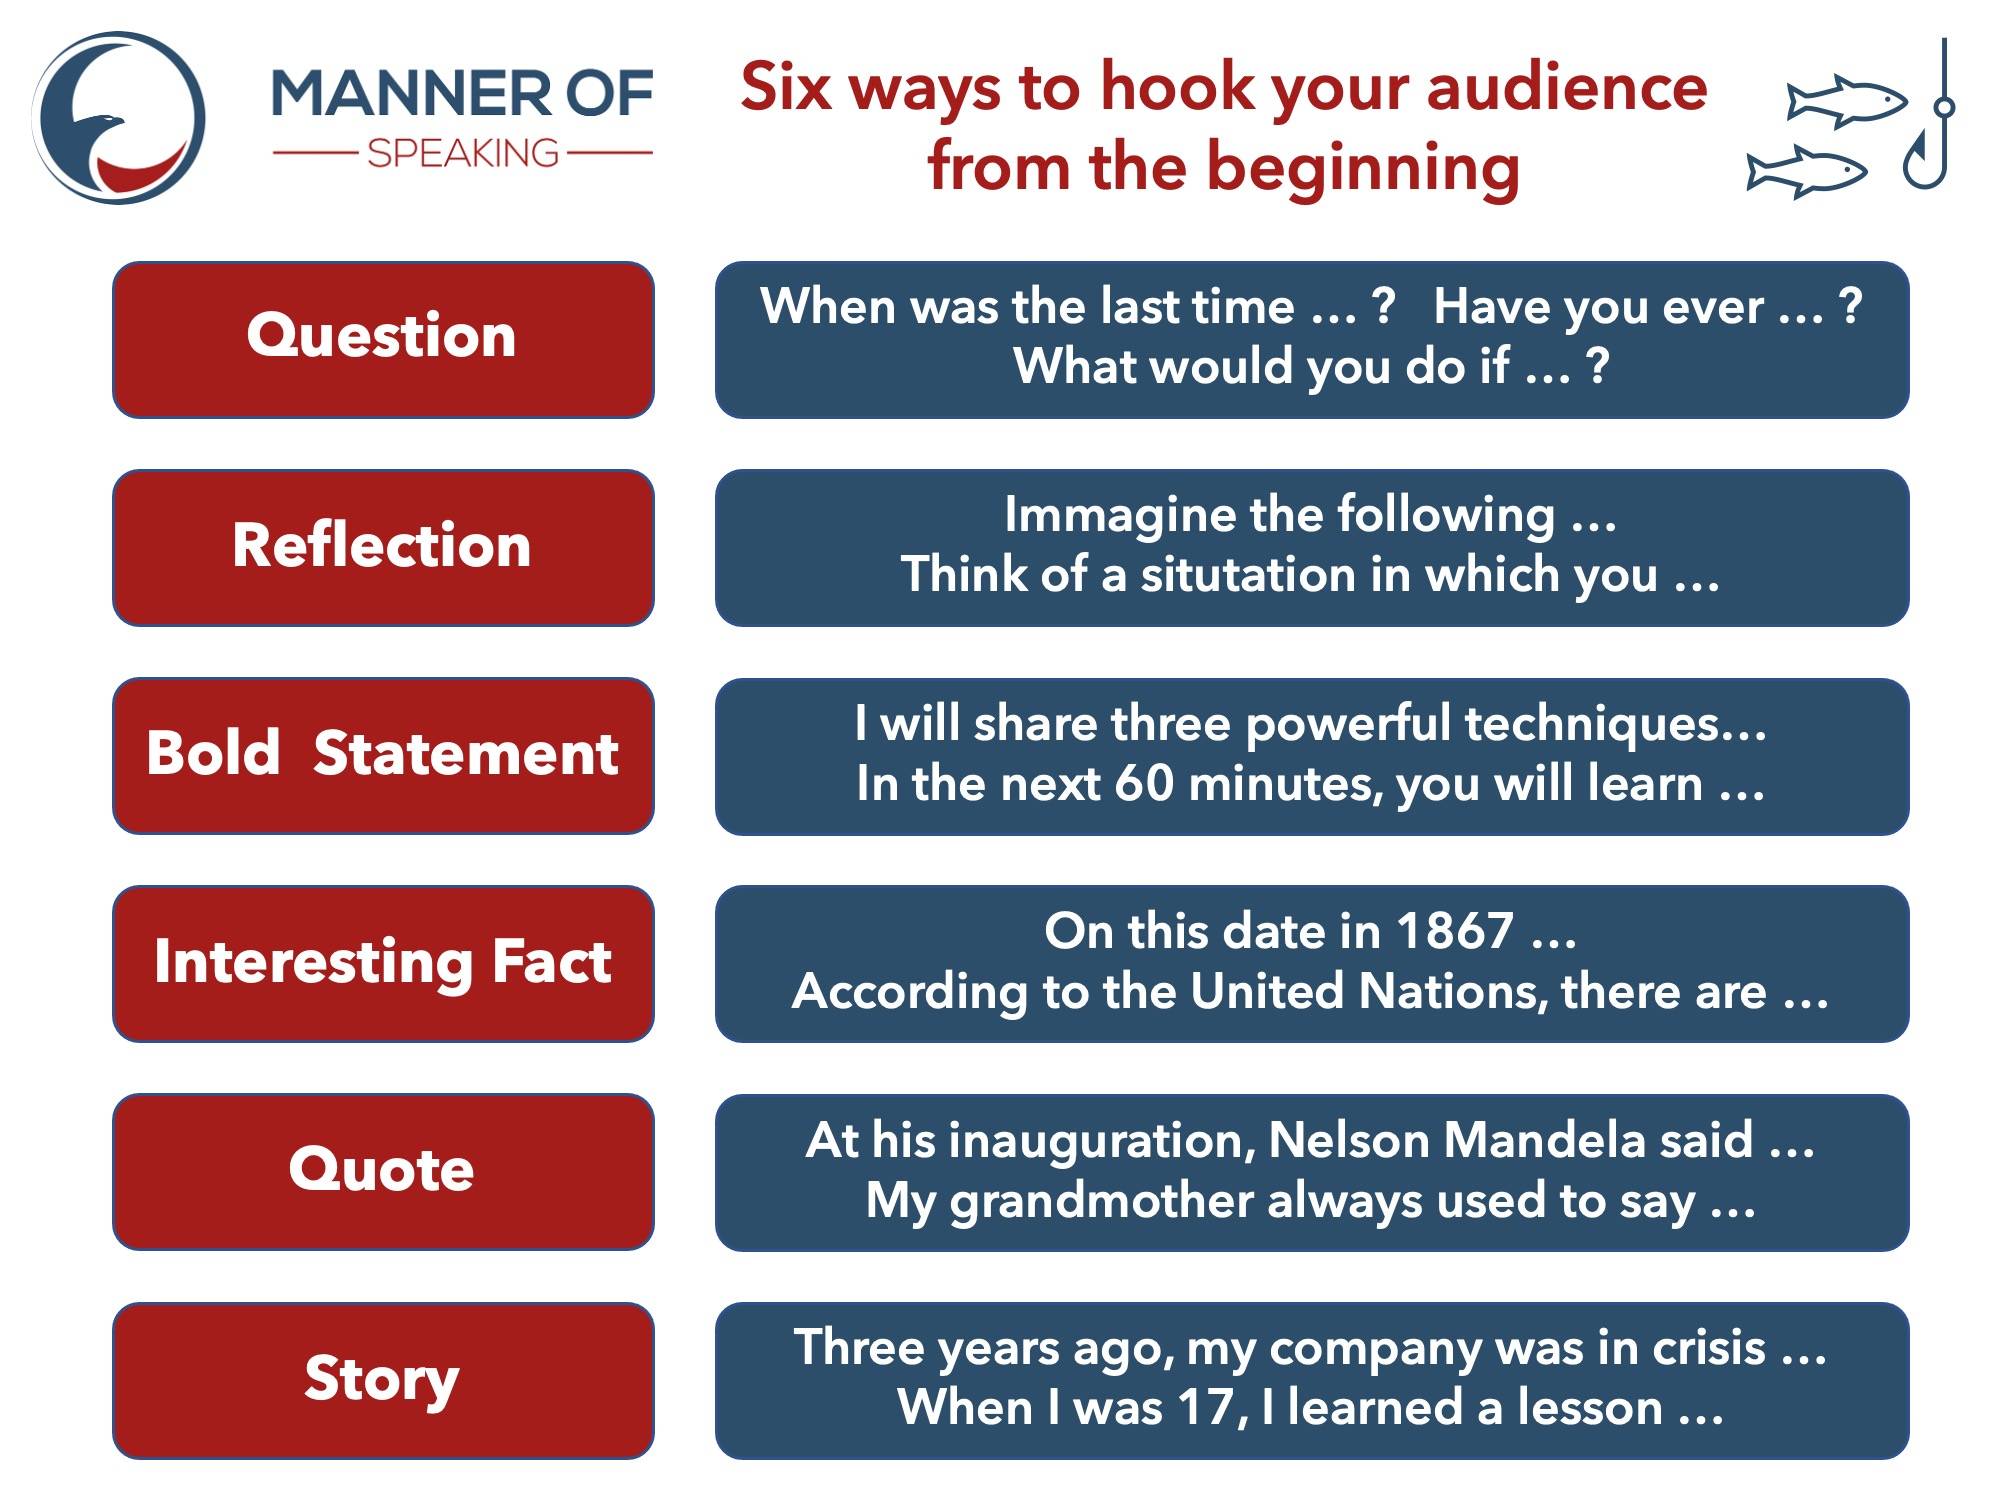 six-ways-to-hook-the-audience-from-the-beginning-manner-of-speaking